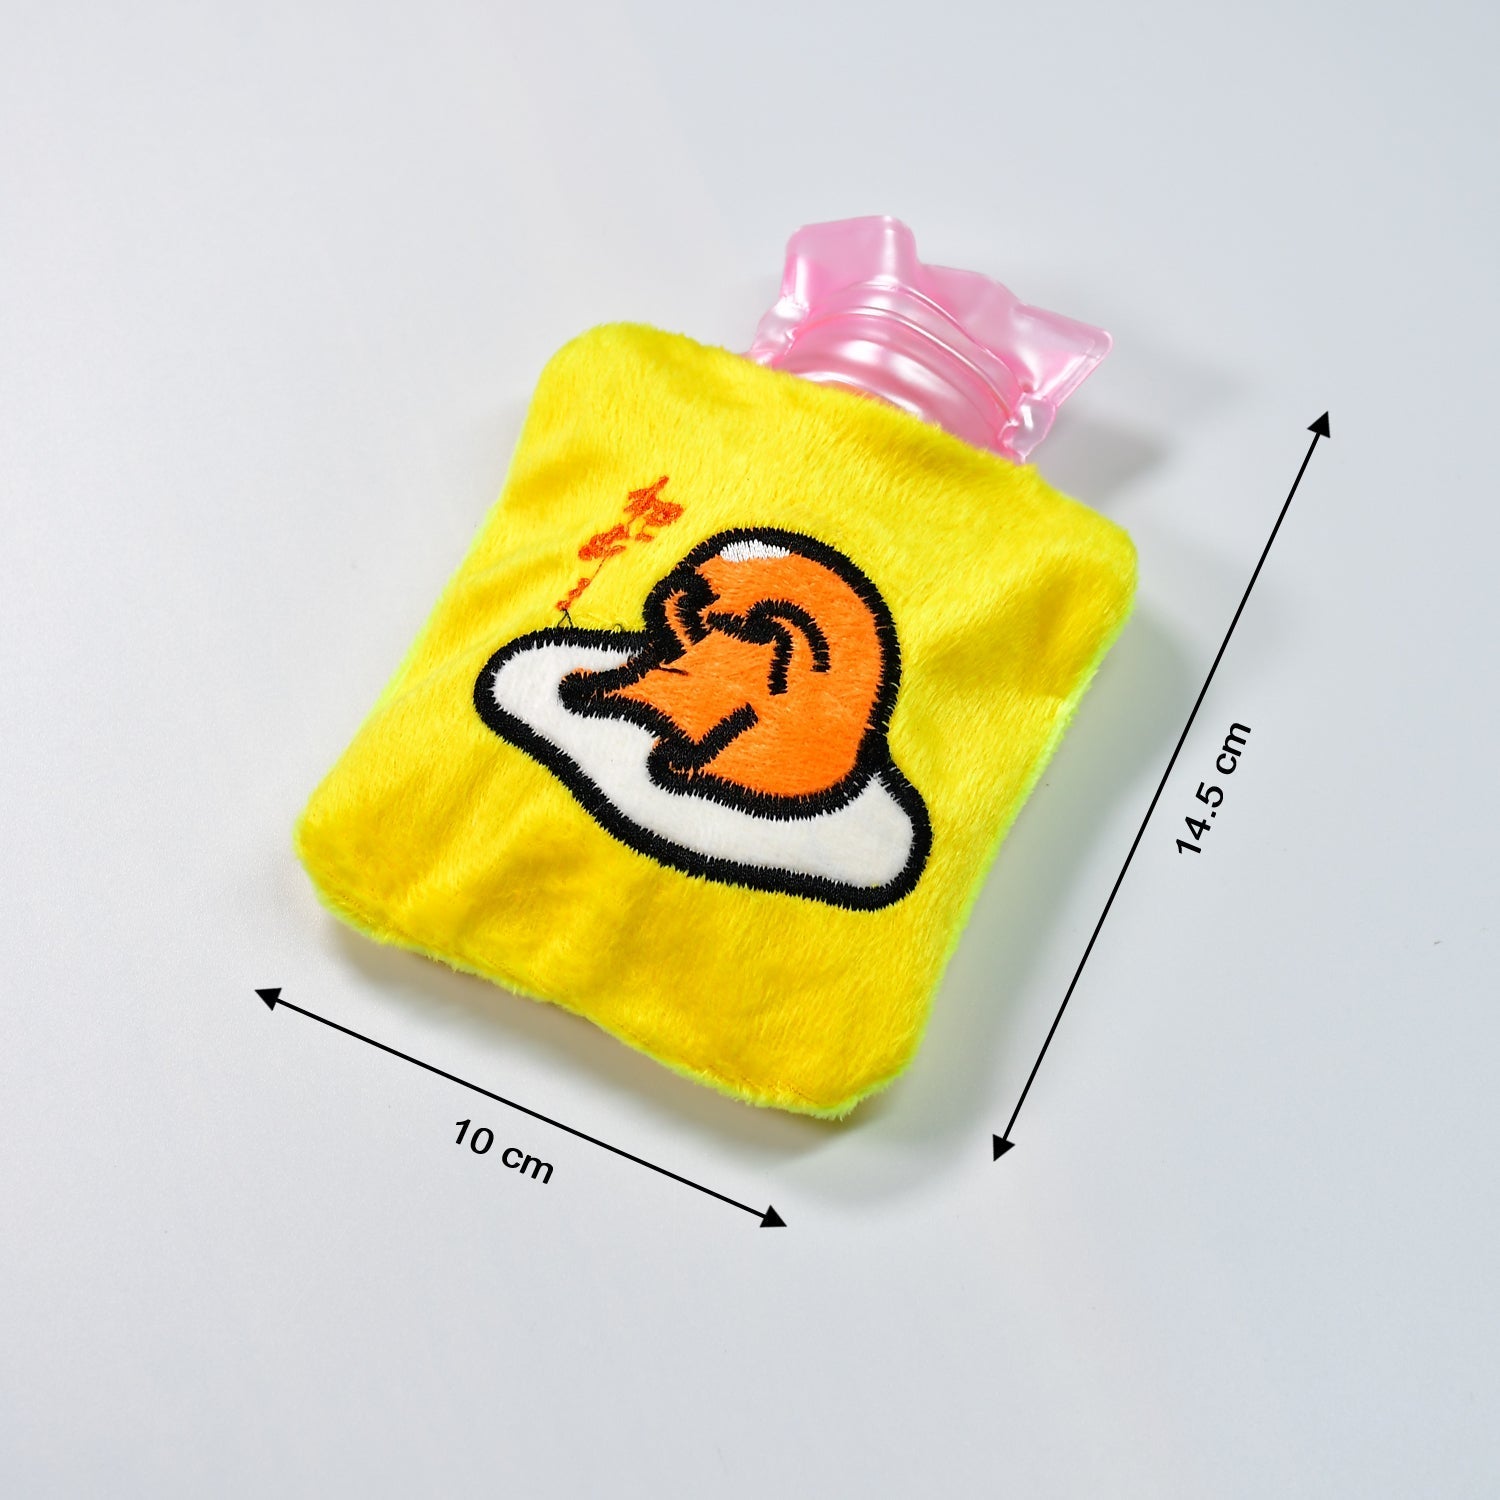 6515 Yellow Duck Head Small Hot Water Bag with Cover for Pain Relief, Neck, Shoulder Pain and Hand, Feet Warmer, Menstrual Cramps. DeoDap